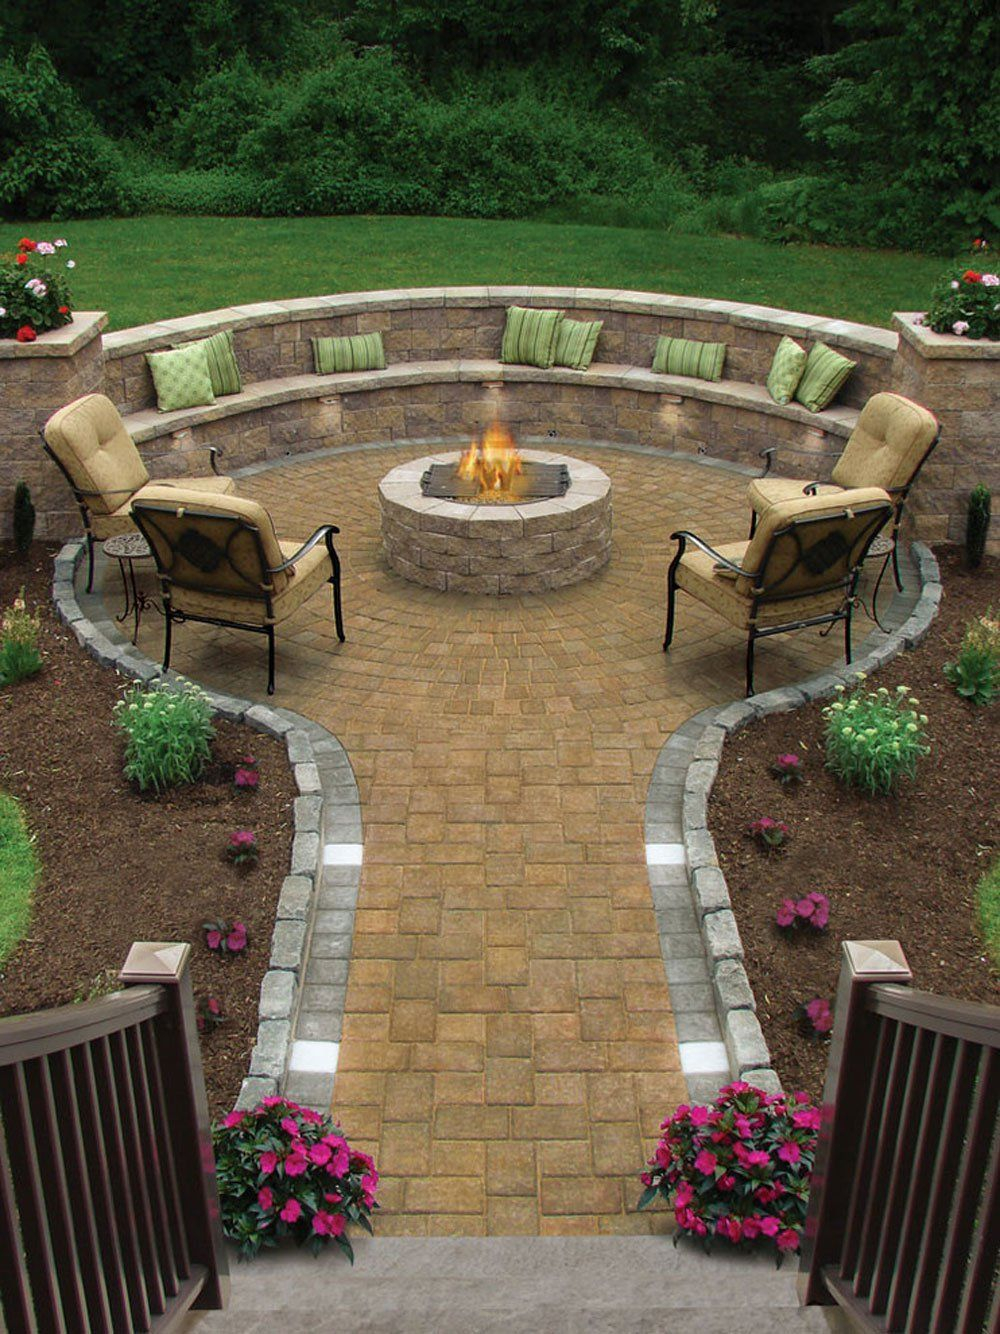 17 Of The Most Amazing Seating Area Around The Fire Pit Ever in dimensions 1000 X 1334